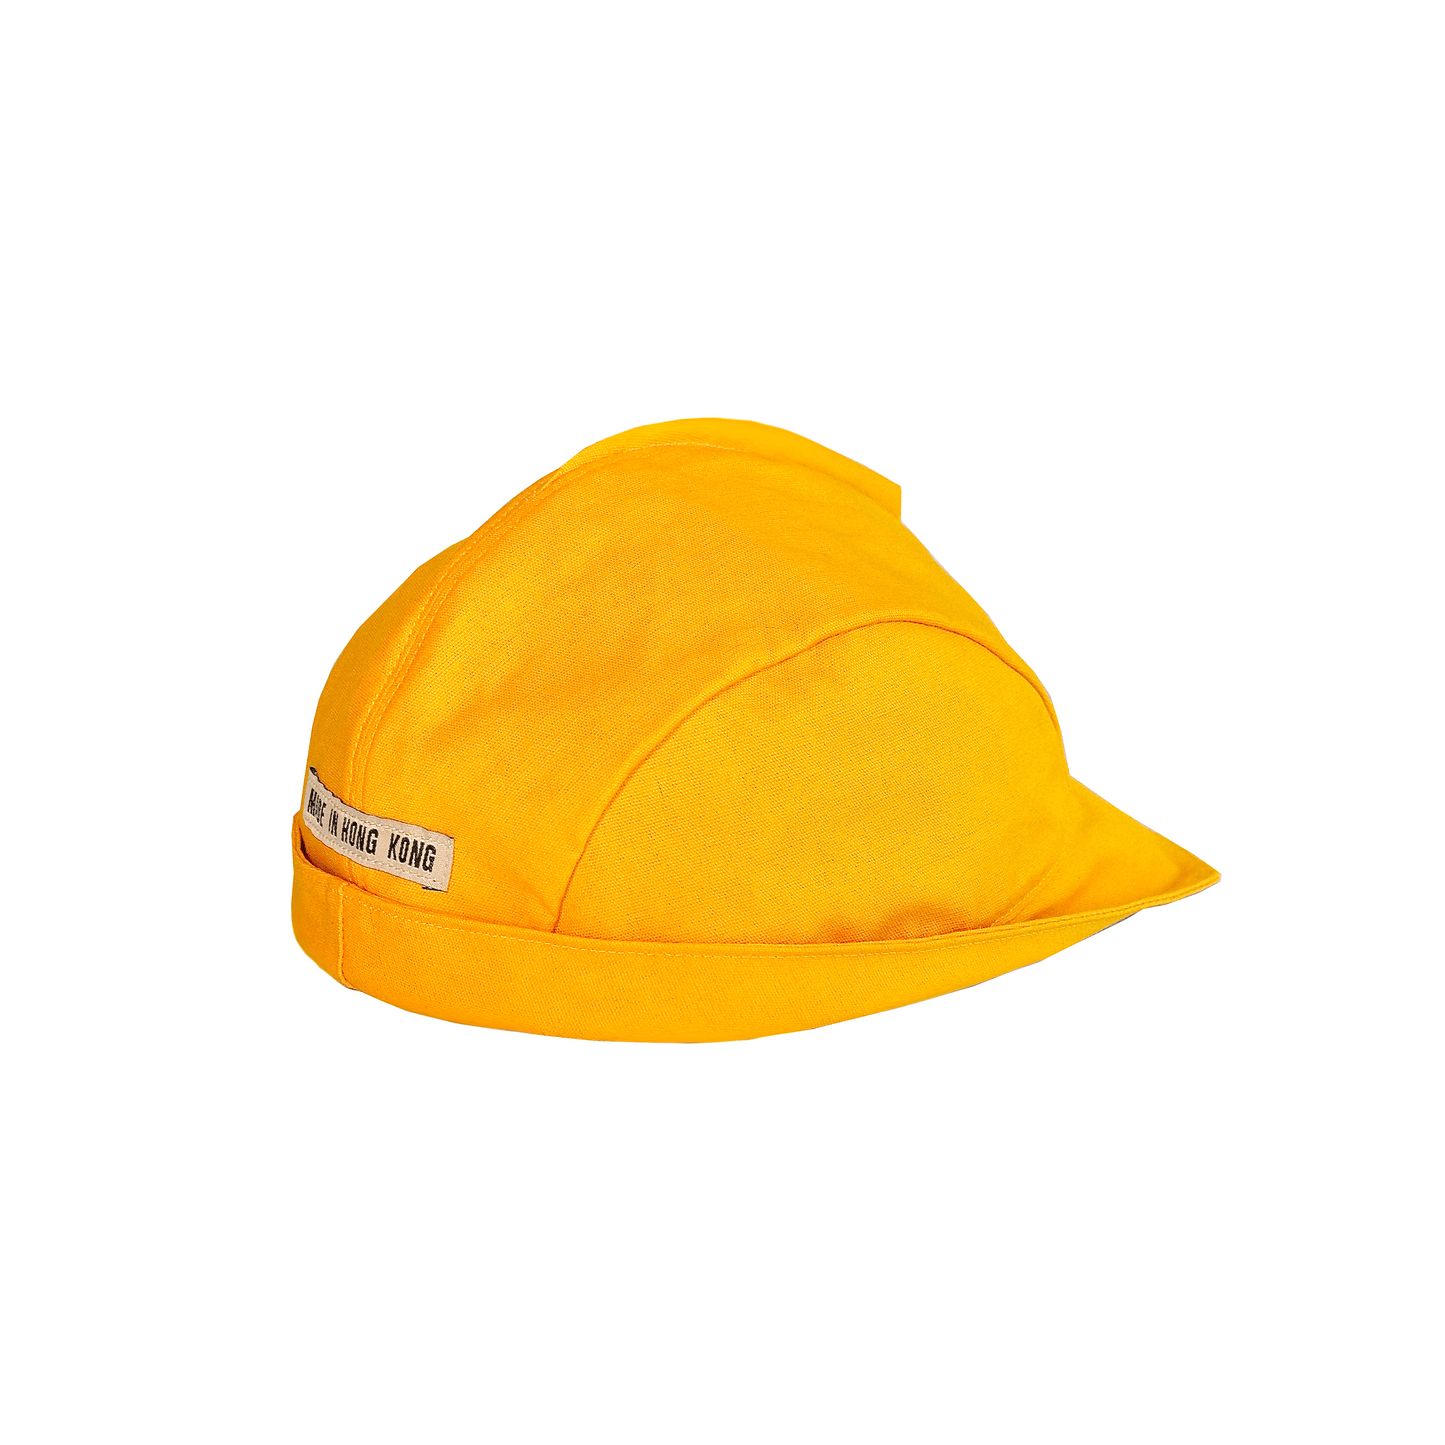 Non-Safety Hat (Yellow) - A Yellow Object